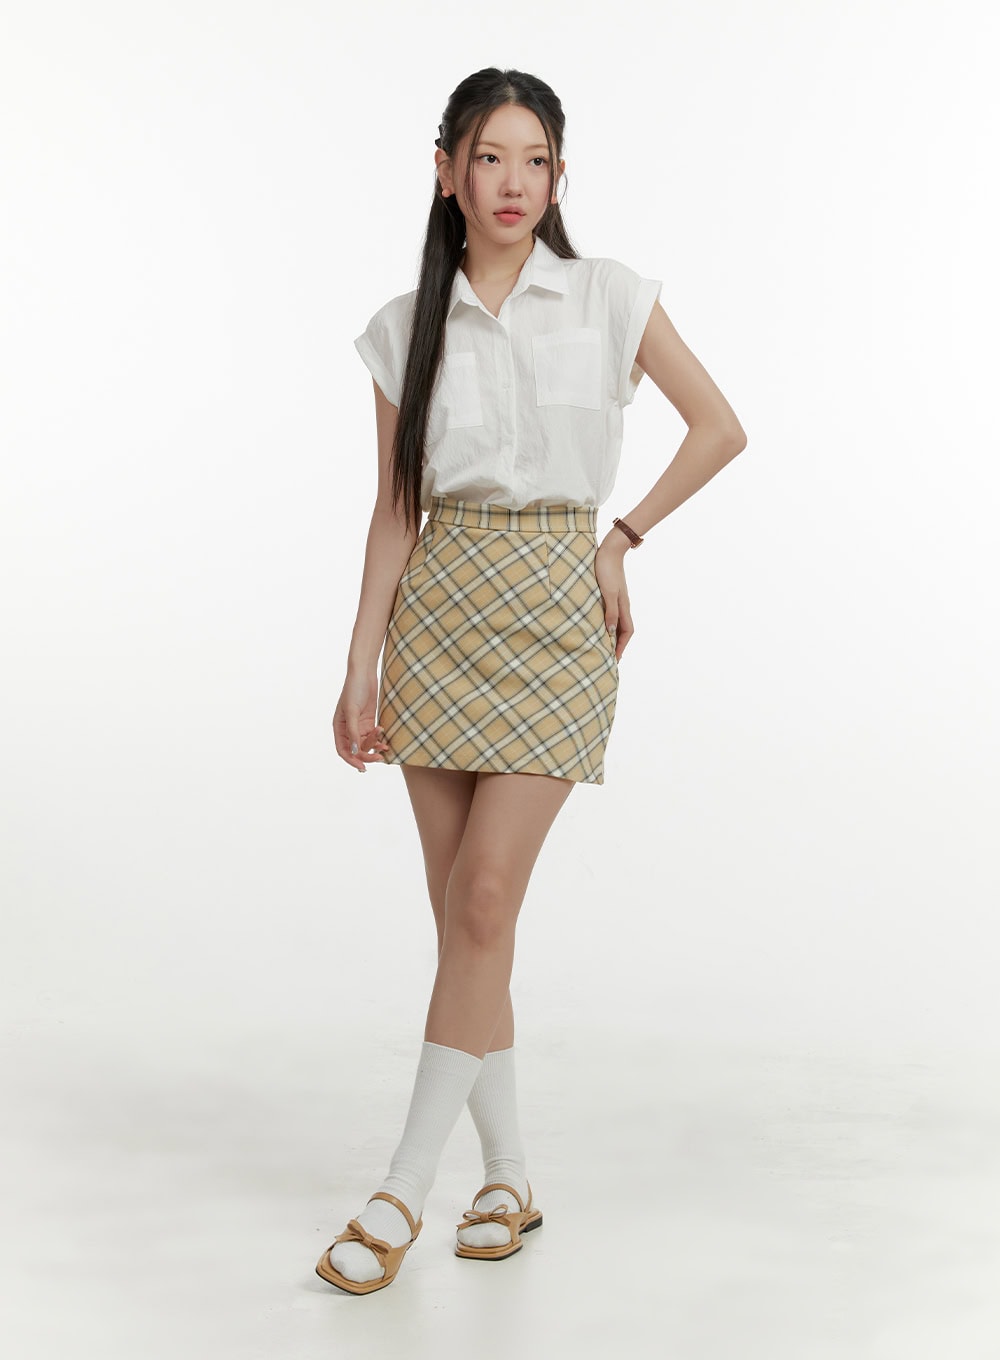 solid-sleeveless-blouse-oy413